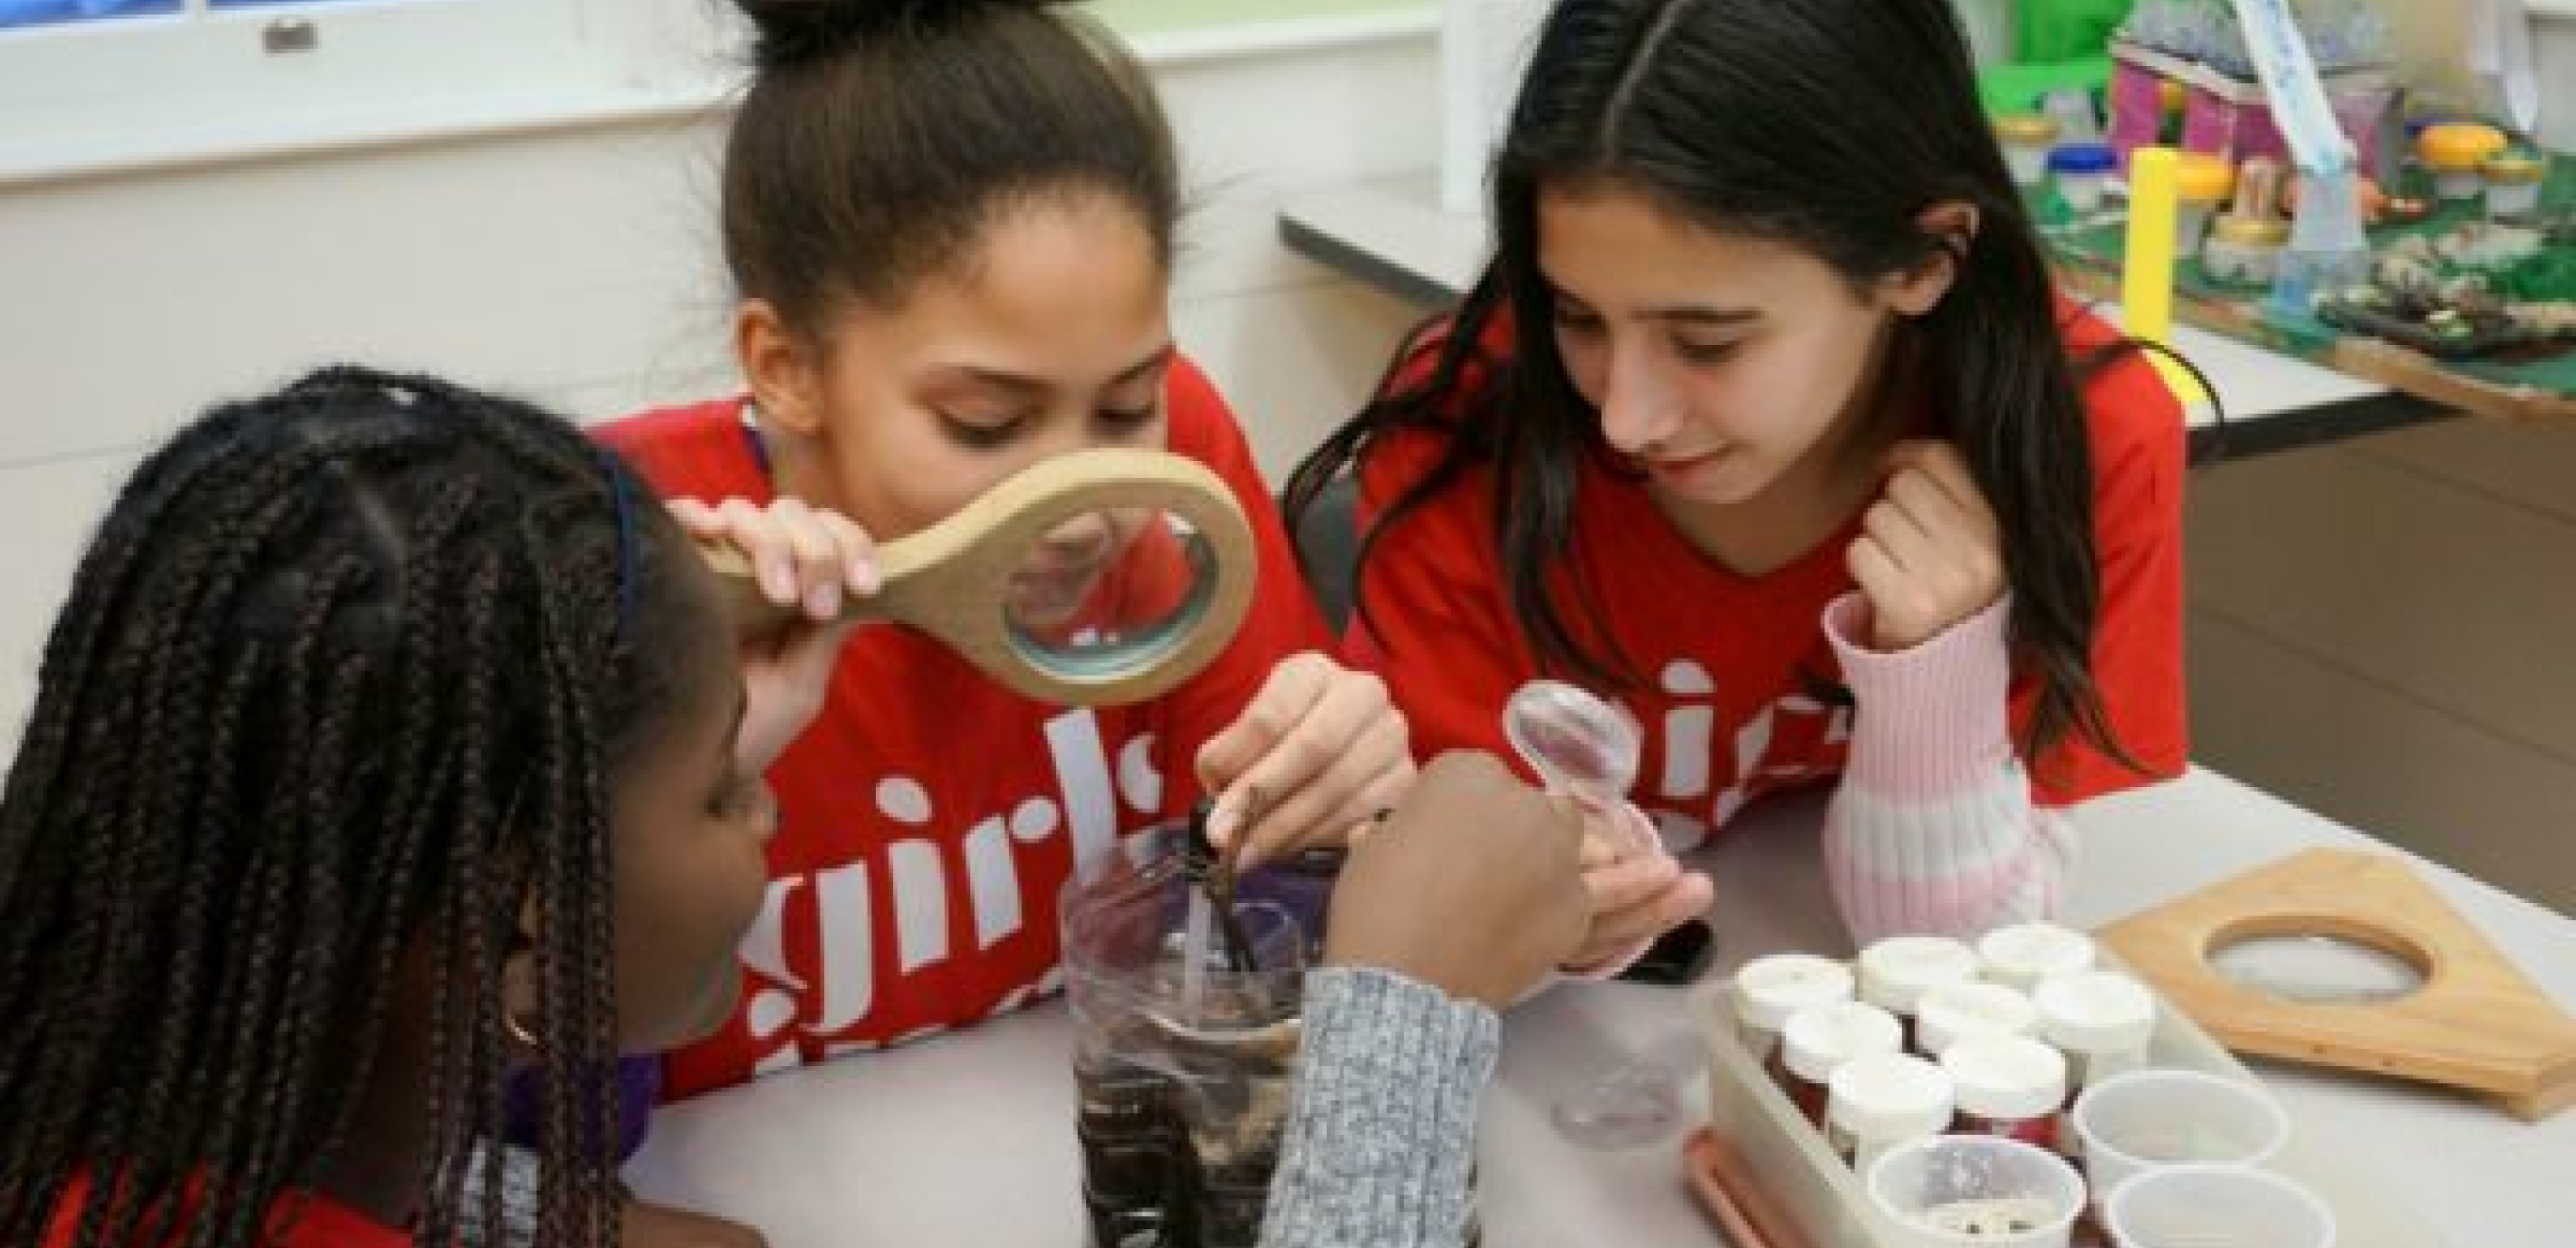 In this picture, three young girls with different skin tones are shown with 
magnifying glasses are looking into a cut-in-half bottle of brown water.